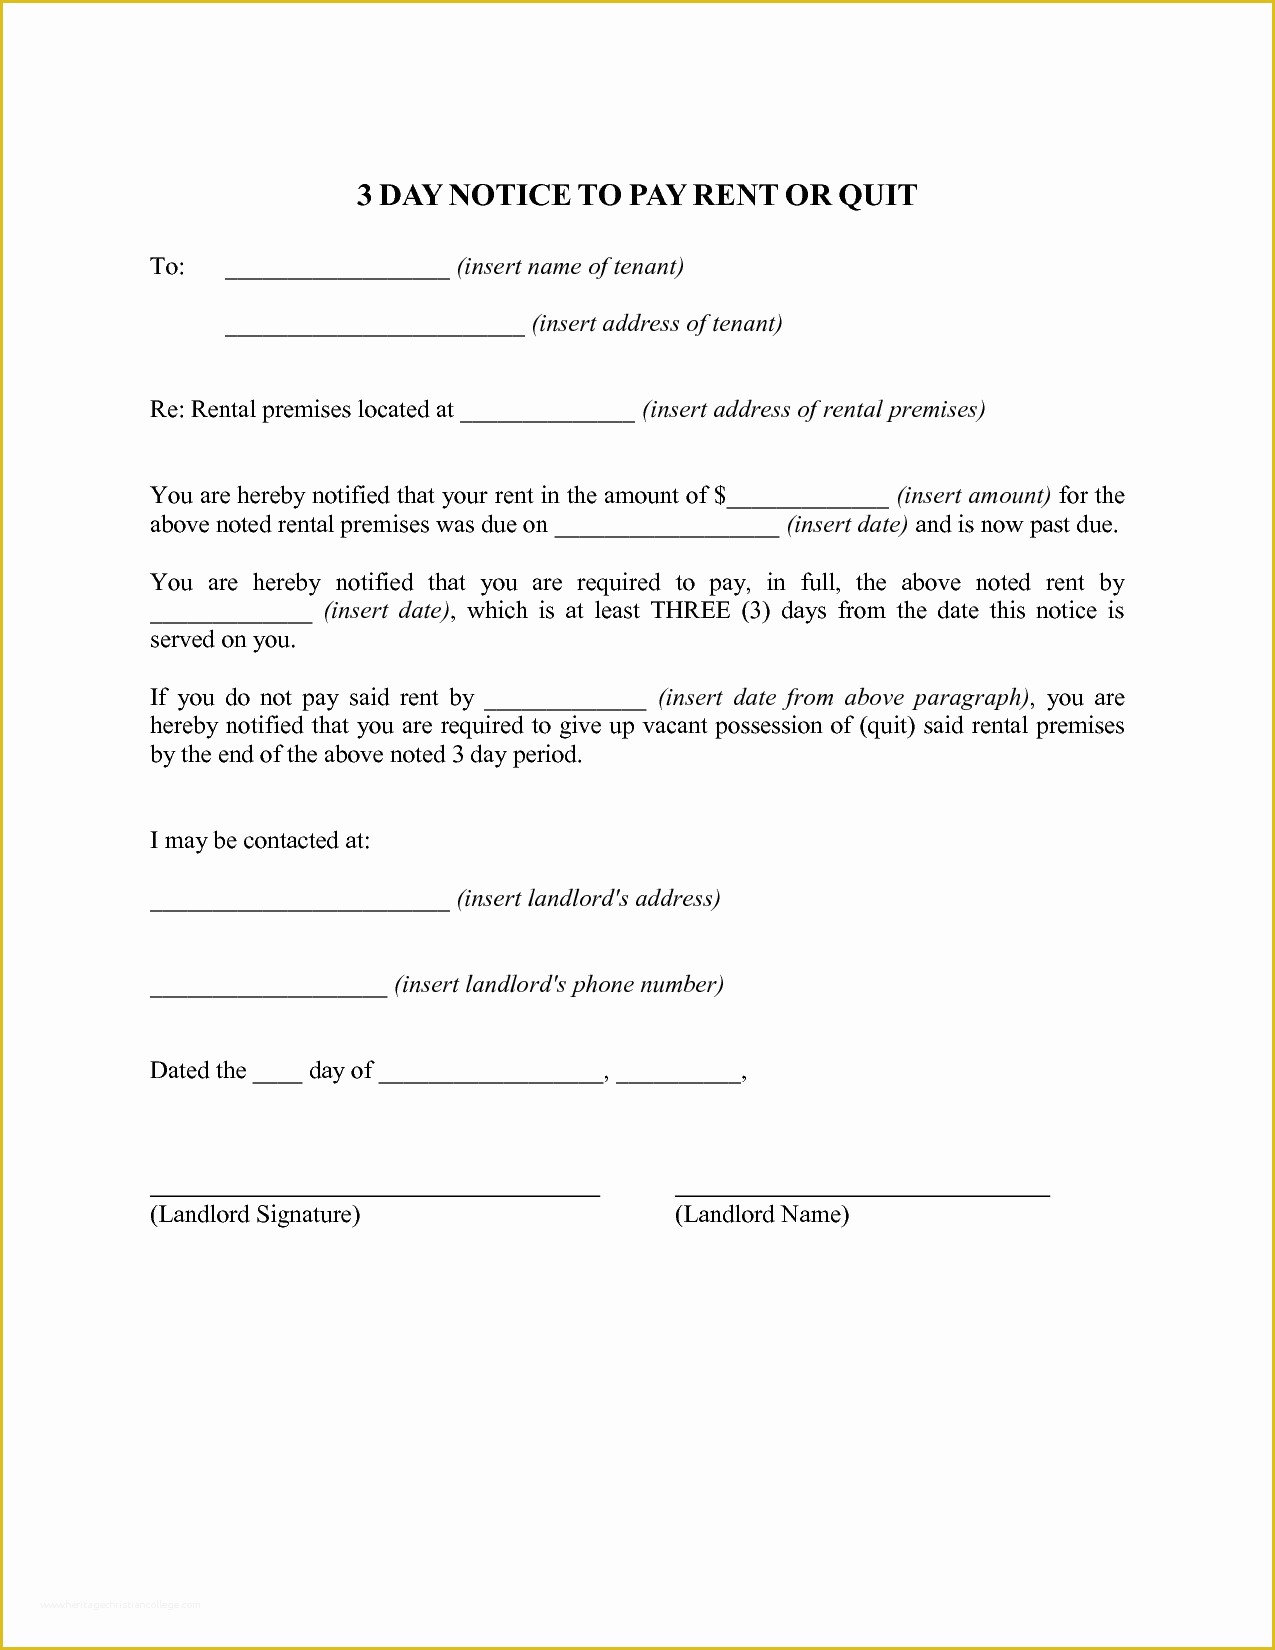 42 Free Notice to Pay Rent or Quit Template